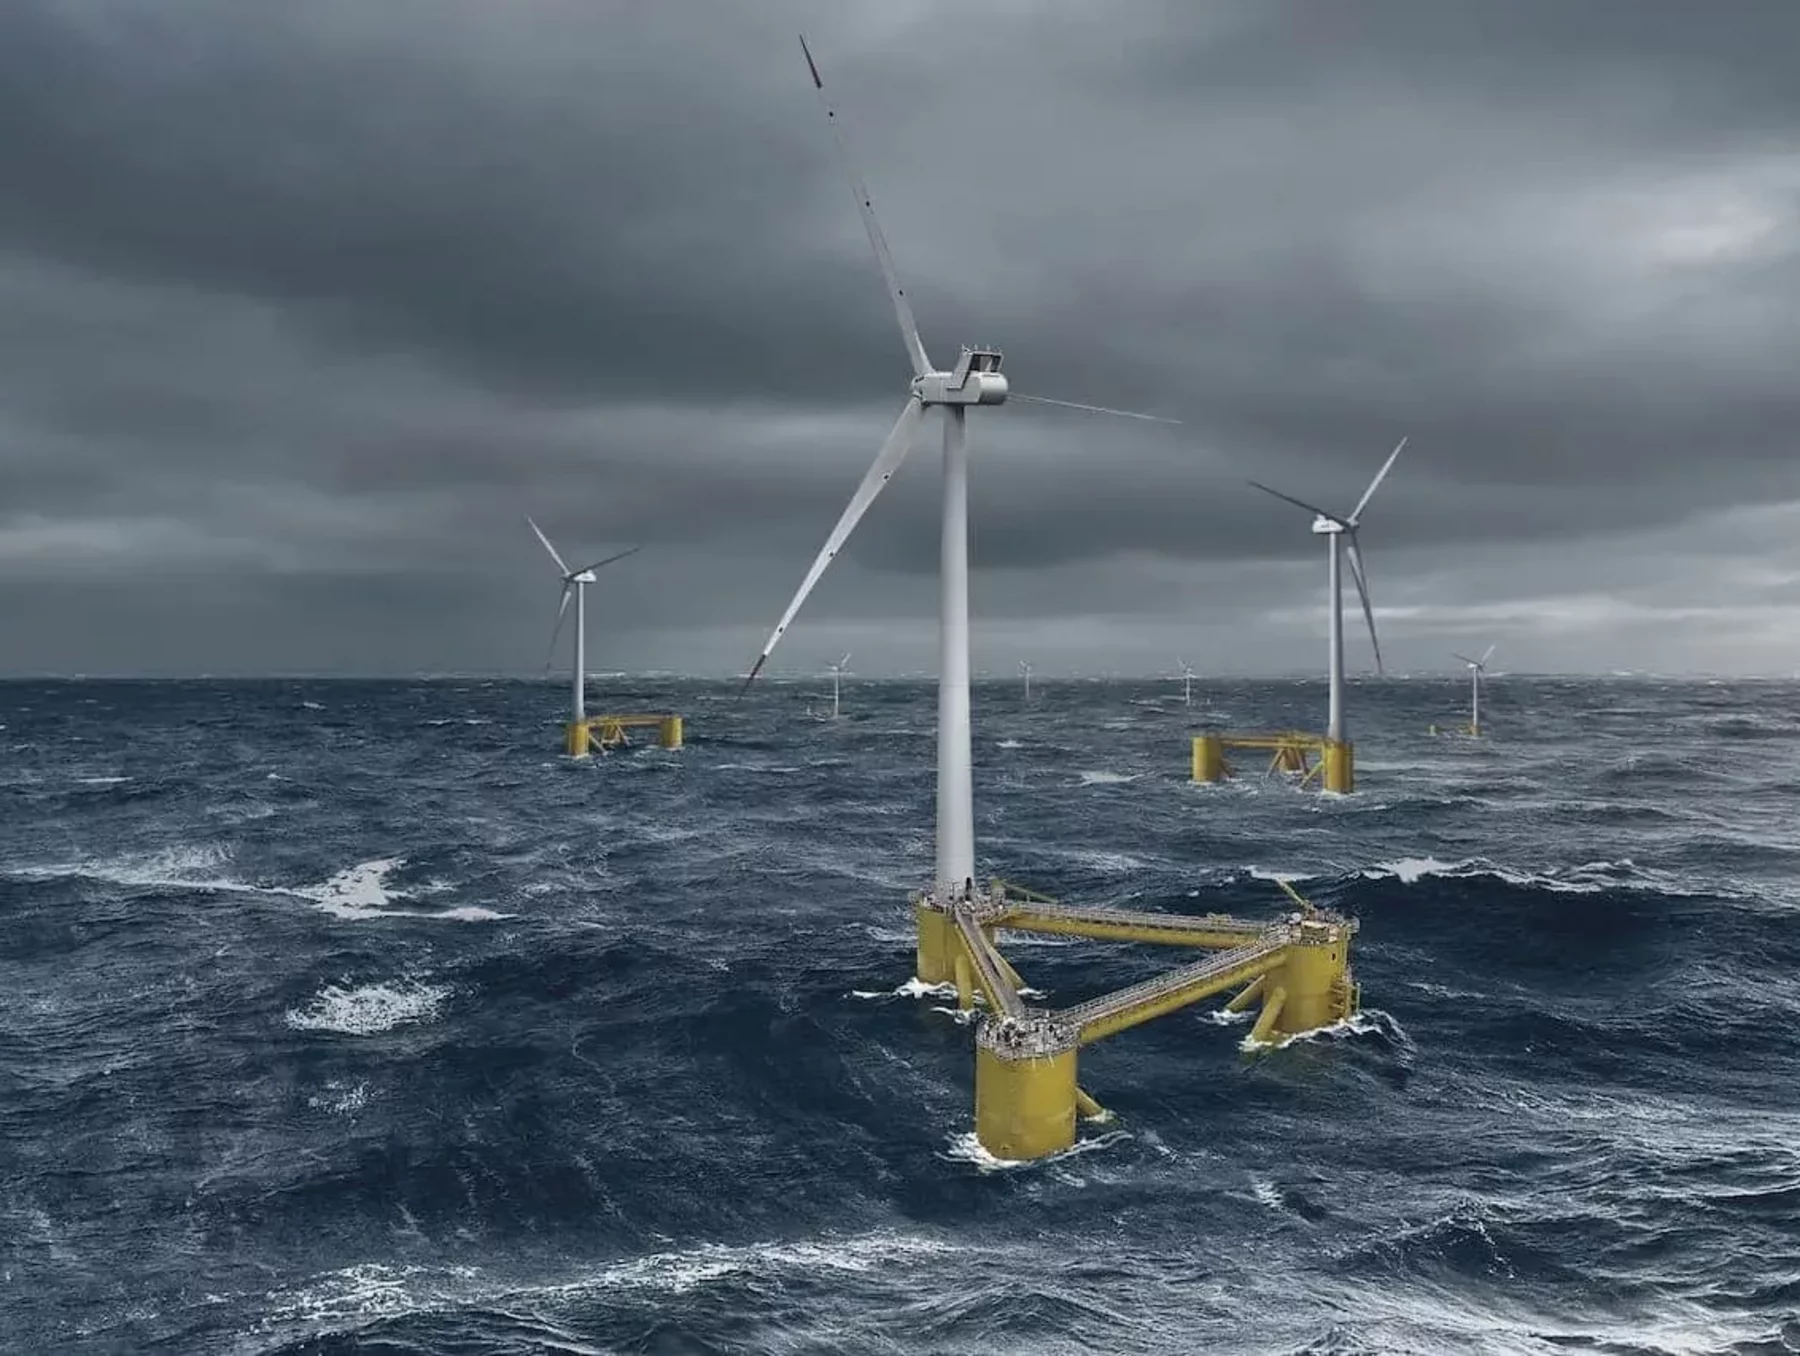 What can we expect for the future of offshore wind?